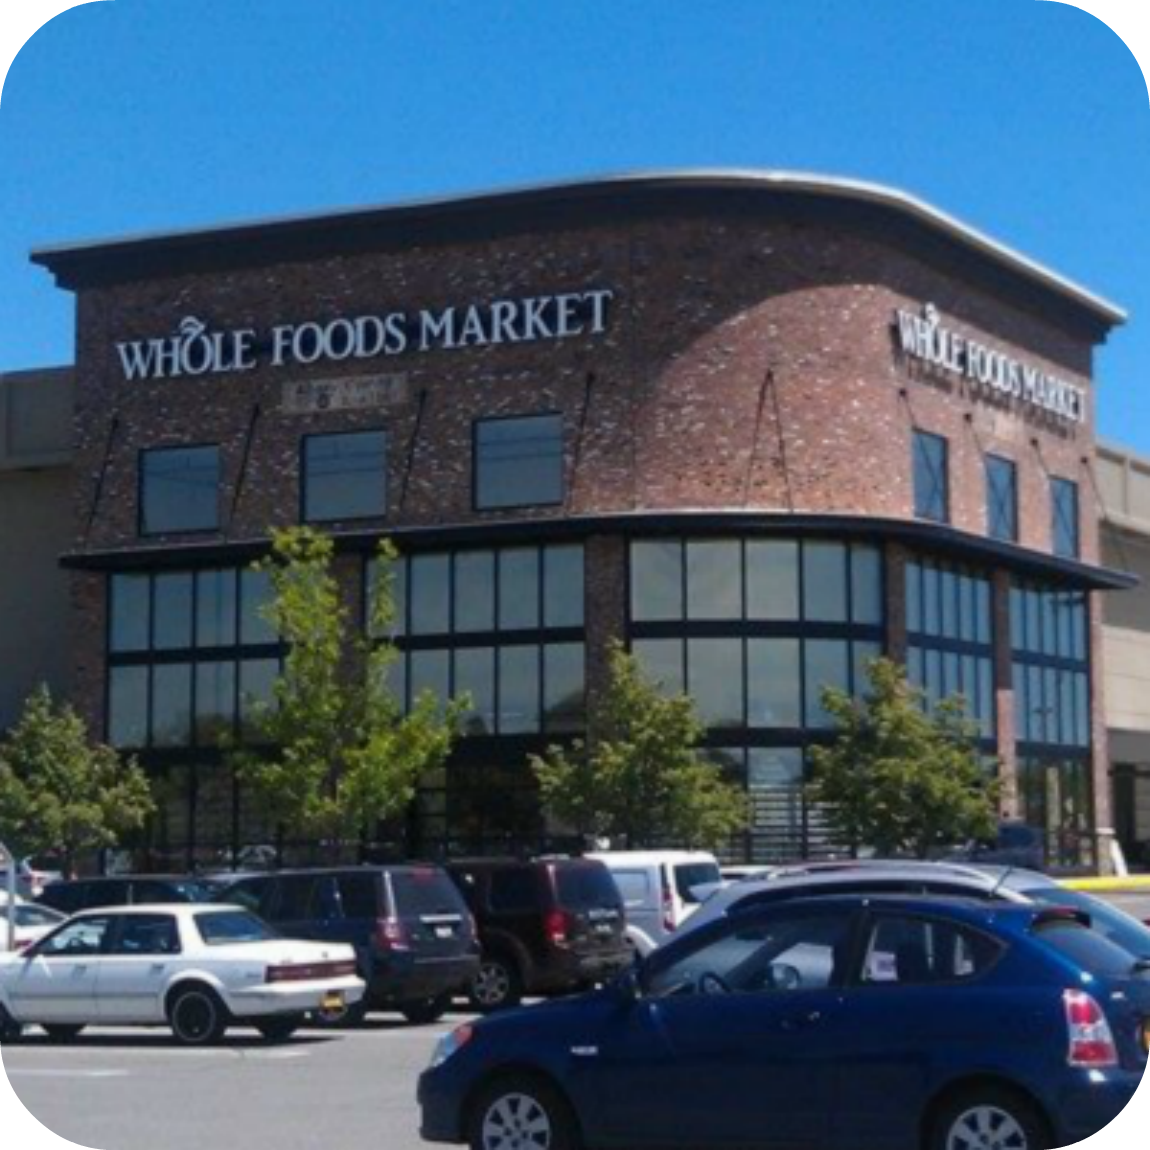 Whole Foods has a new store in Albany, NY!